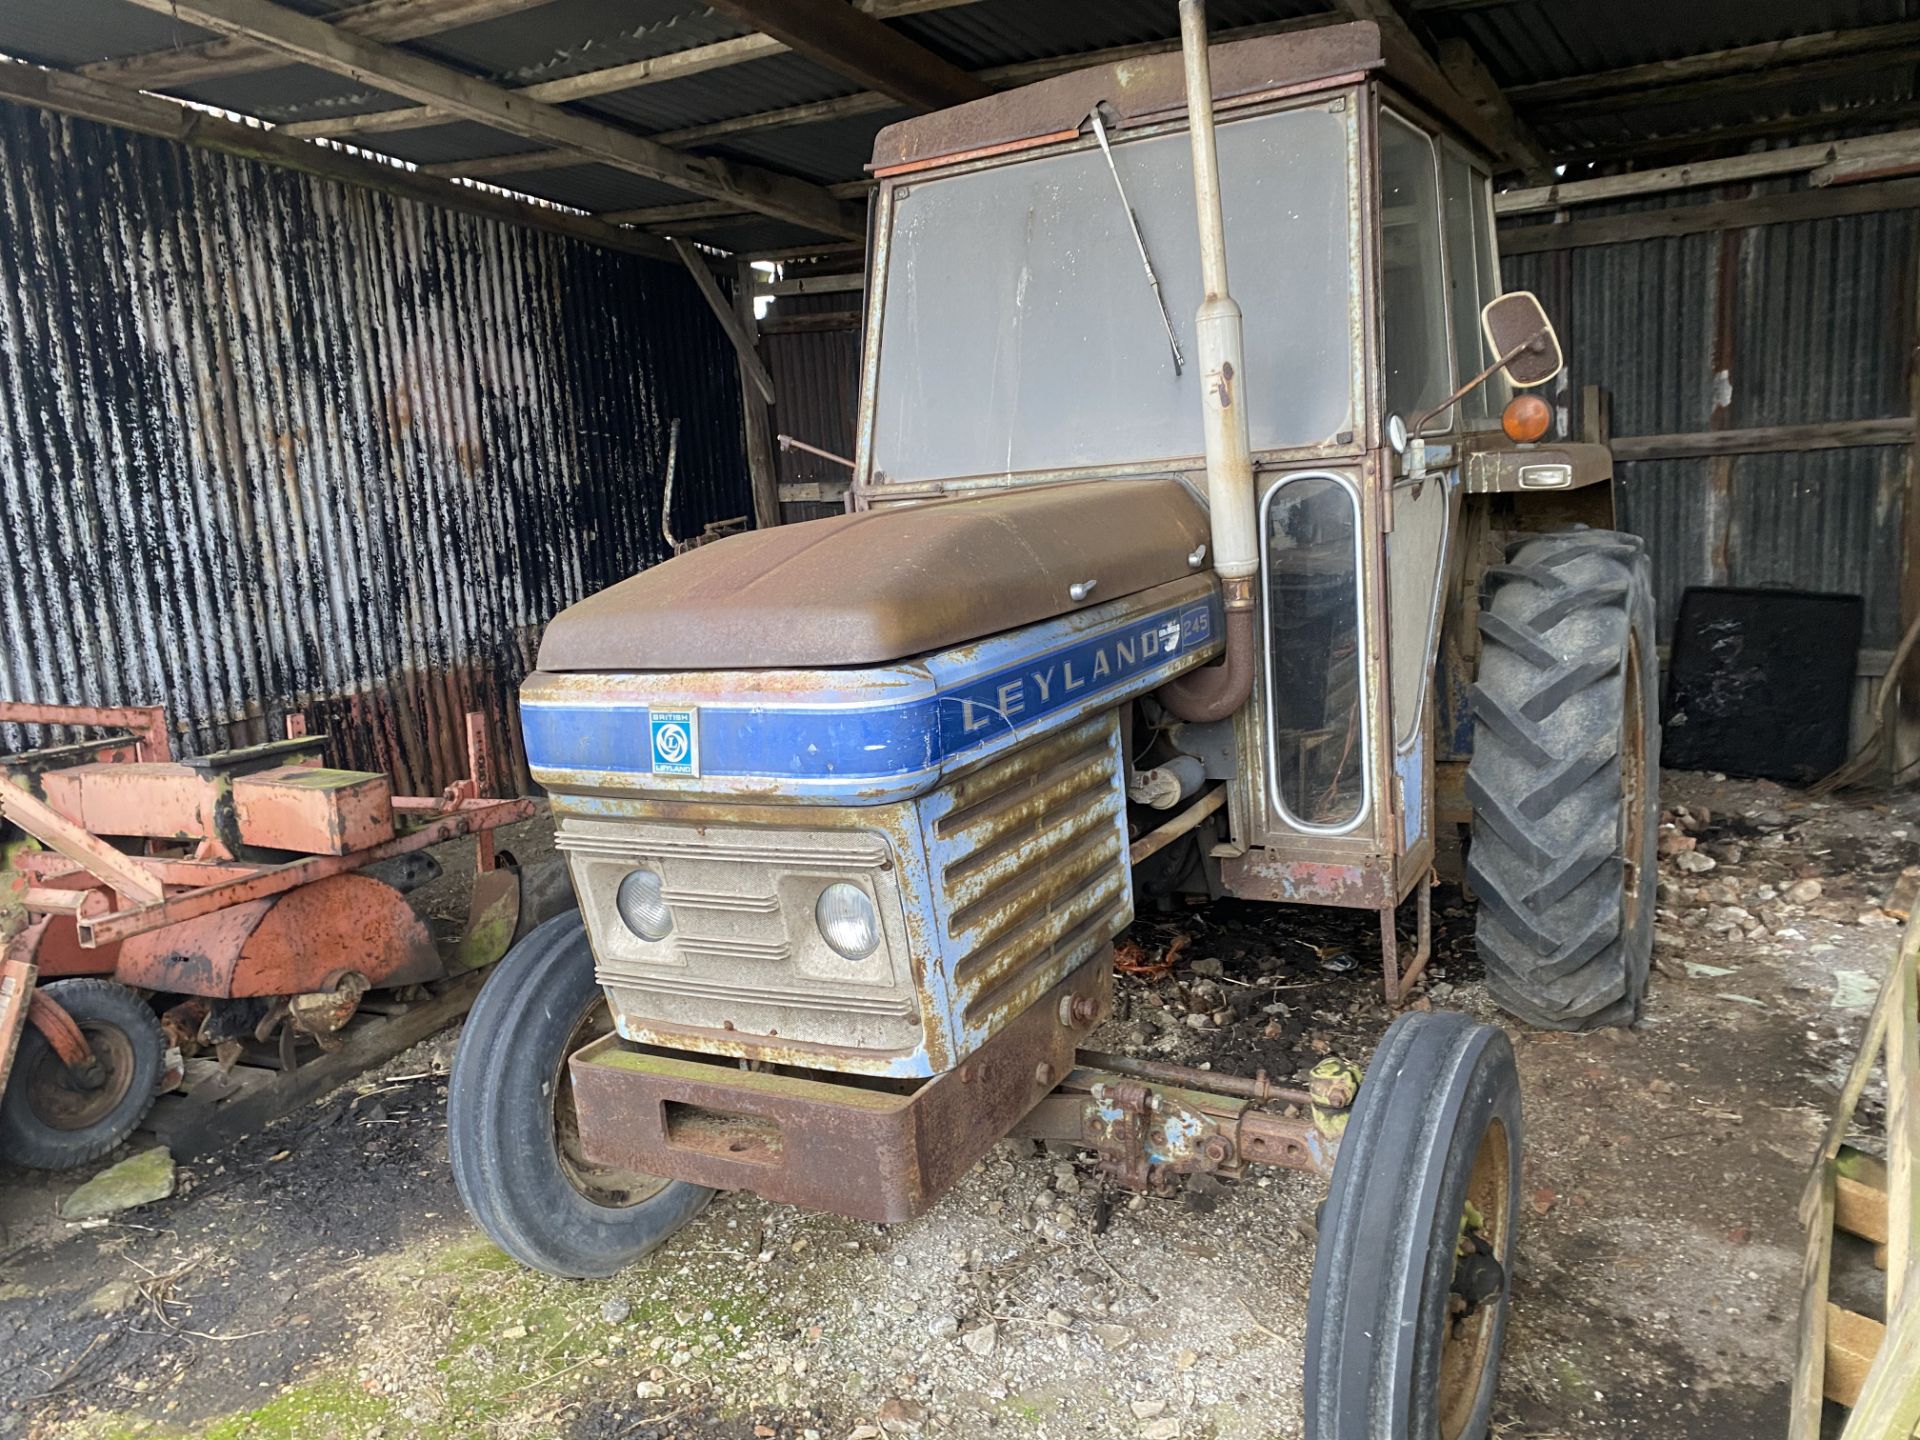 (75) Leyland 245 2wd tractor, 8,500 hrs, Reg KCT 534P, one owner from new, manual in office - Bild 3 aus 4